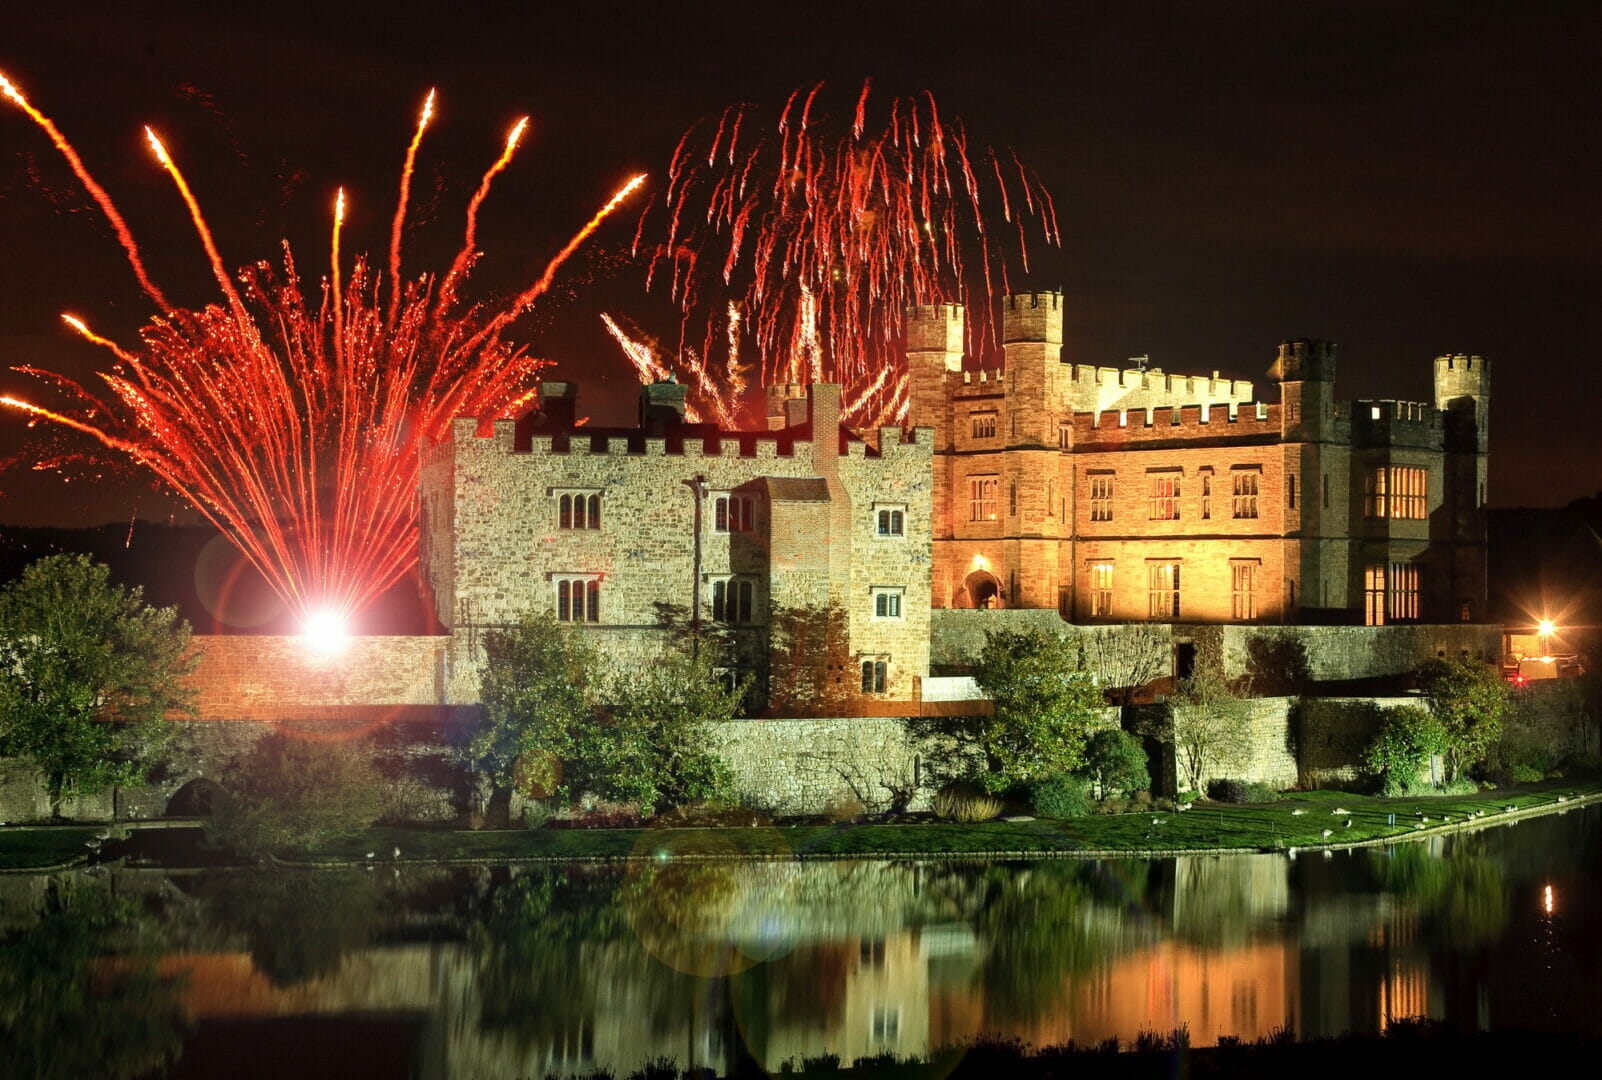 ‘Ohhh’ and ‘ahhh’ this New Year’s Eve at Leeds Castle